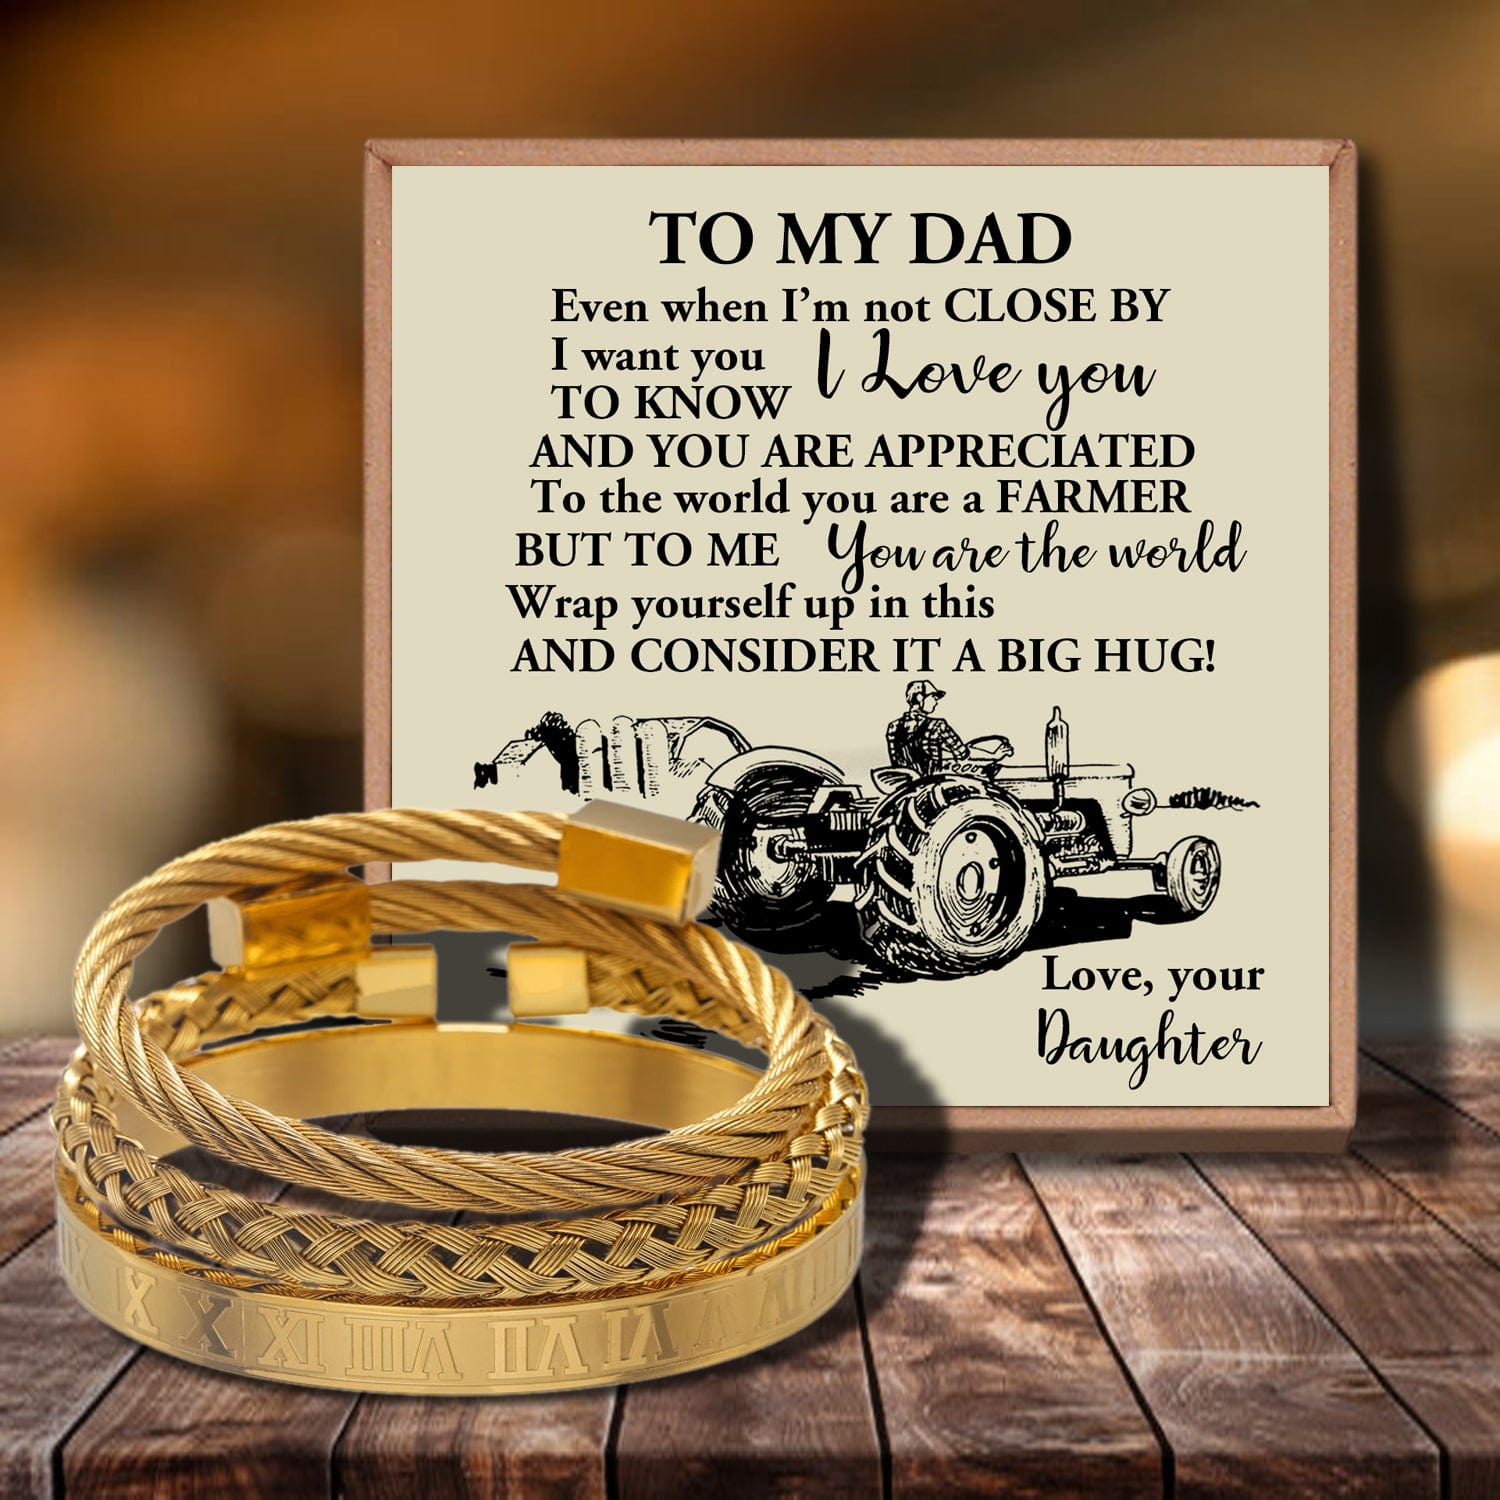 Bracelets For Dad Daughter To Dad - You Are The World's Best Farmer Bangle Weave Roman Numeral Bracelets Gold GiveMe-Gifts